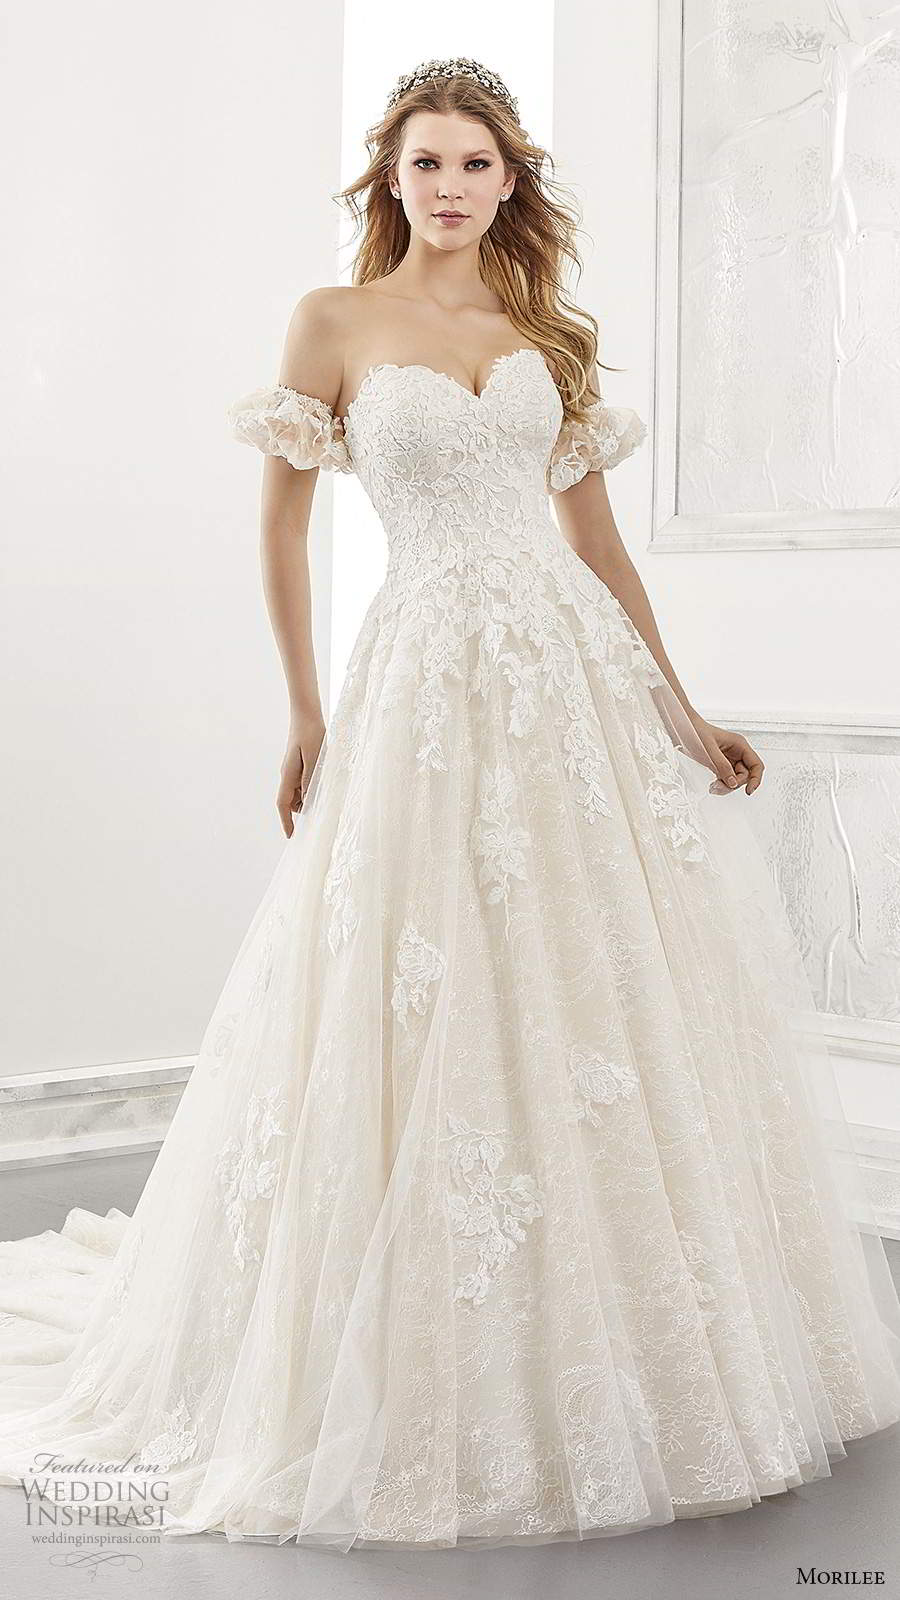 morilee spring 2021 bridal detached short puff sleeves strapless sweetheart neckline embellished bodice a line ball gown wedding dress cathedral train (17) mv